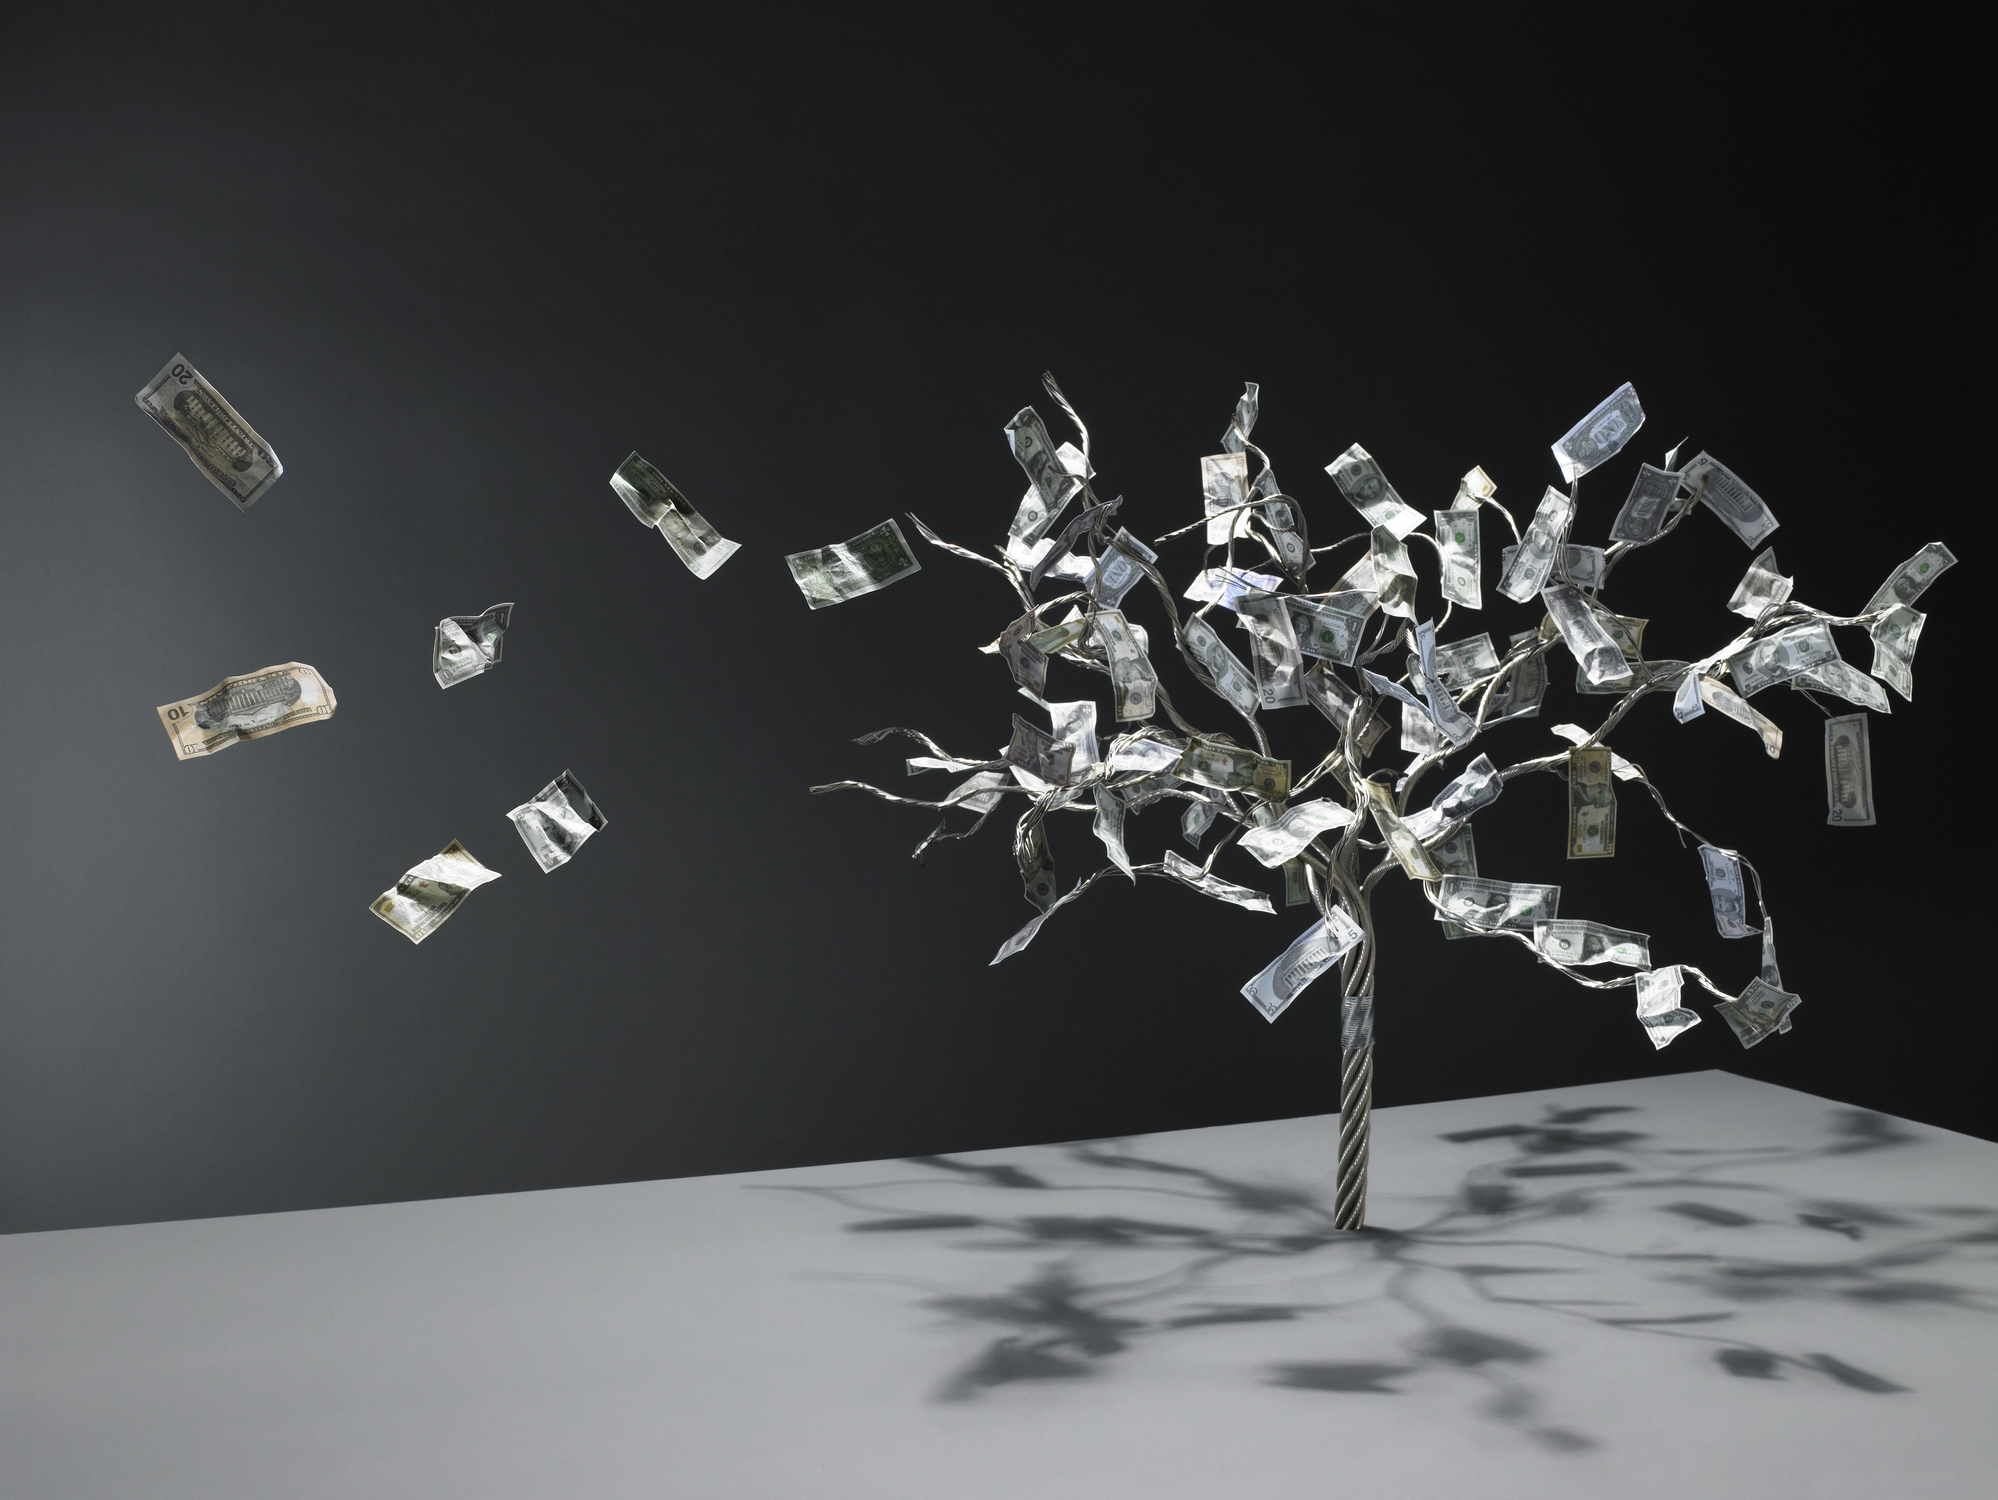 a money tree with money flying away